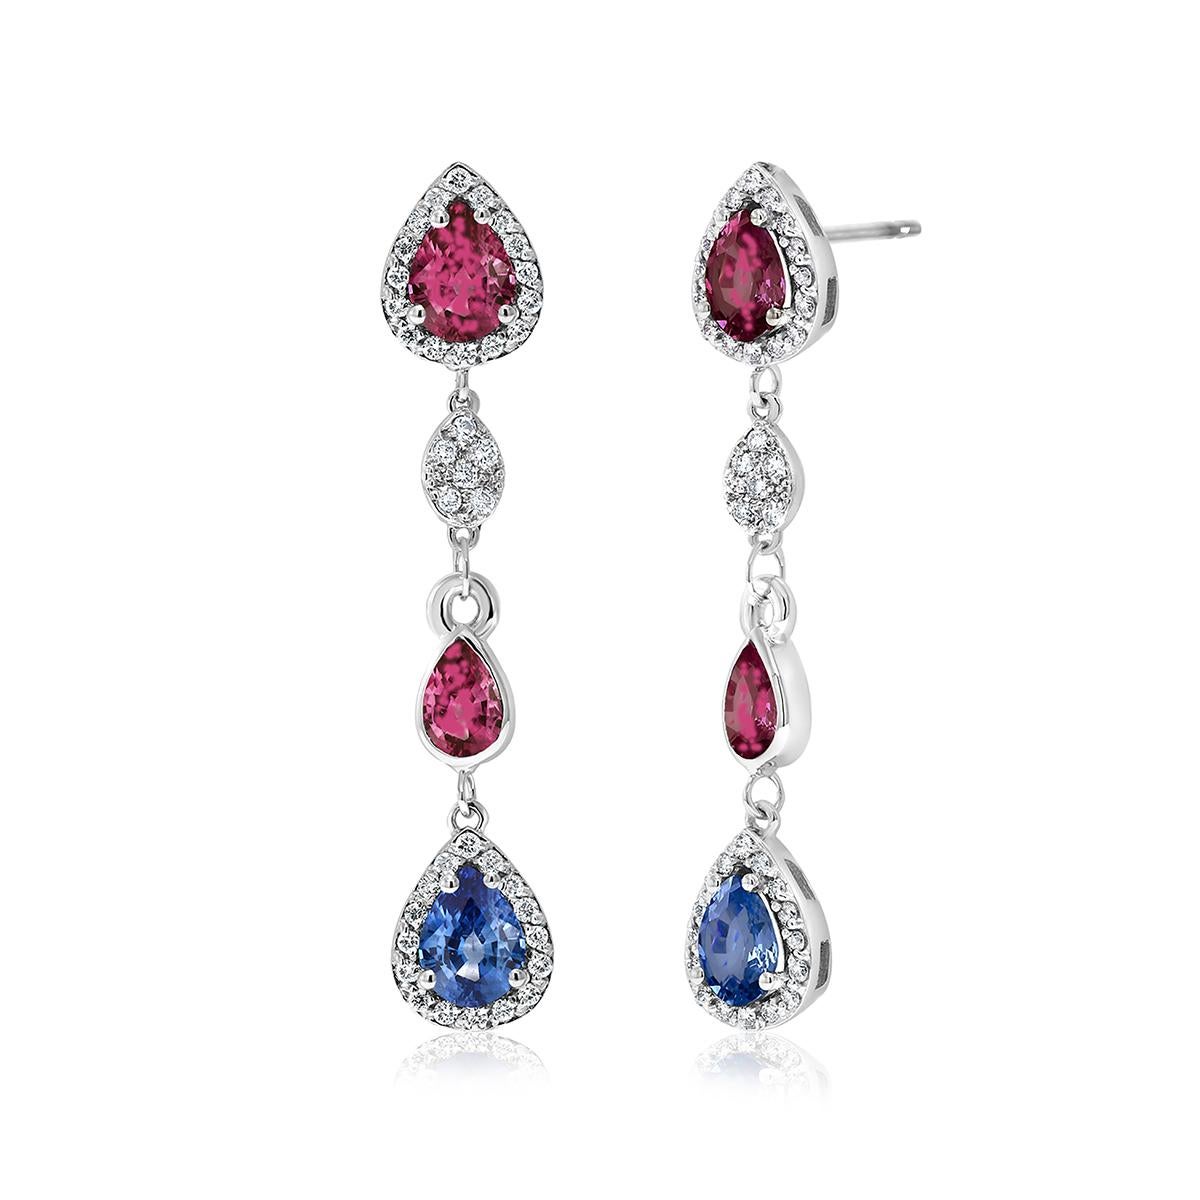 Contemporary Diamond Earrings with Ruby and Sapphire Drops Weighing 4.96 Carat 